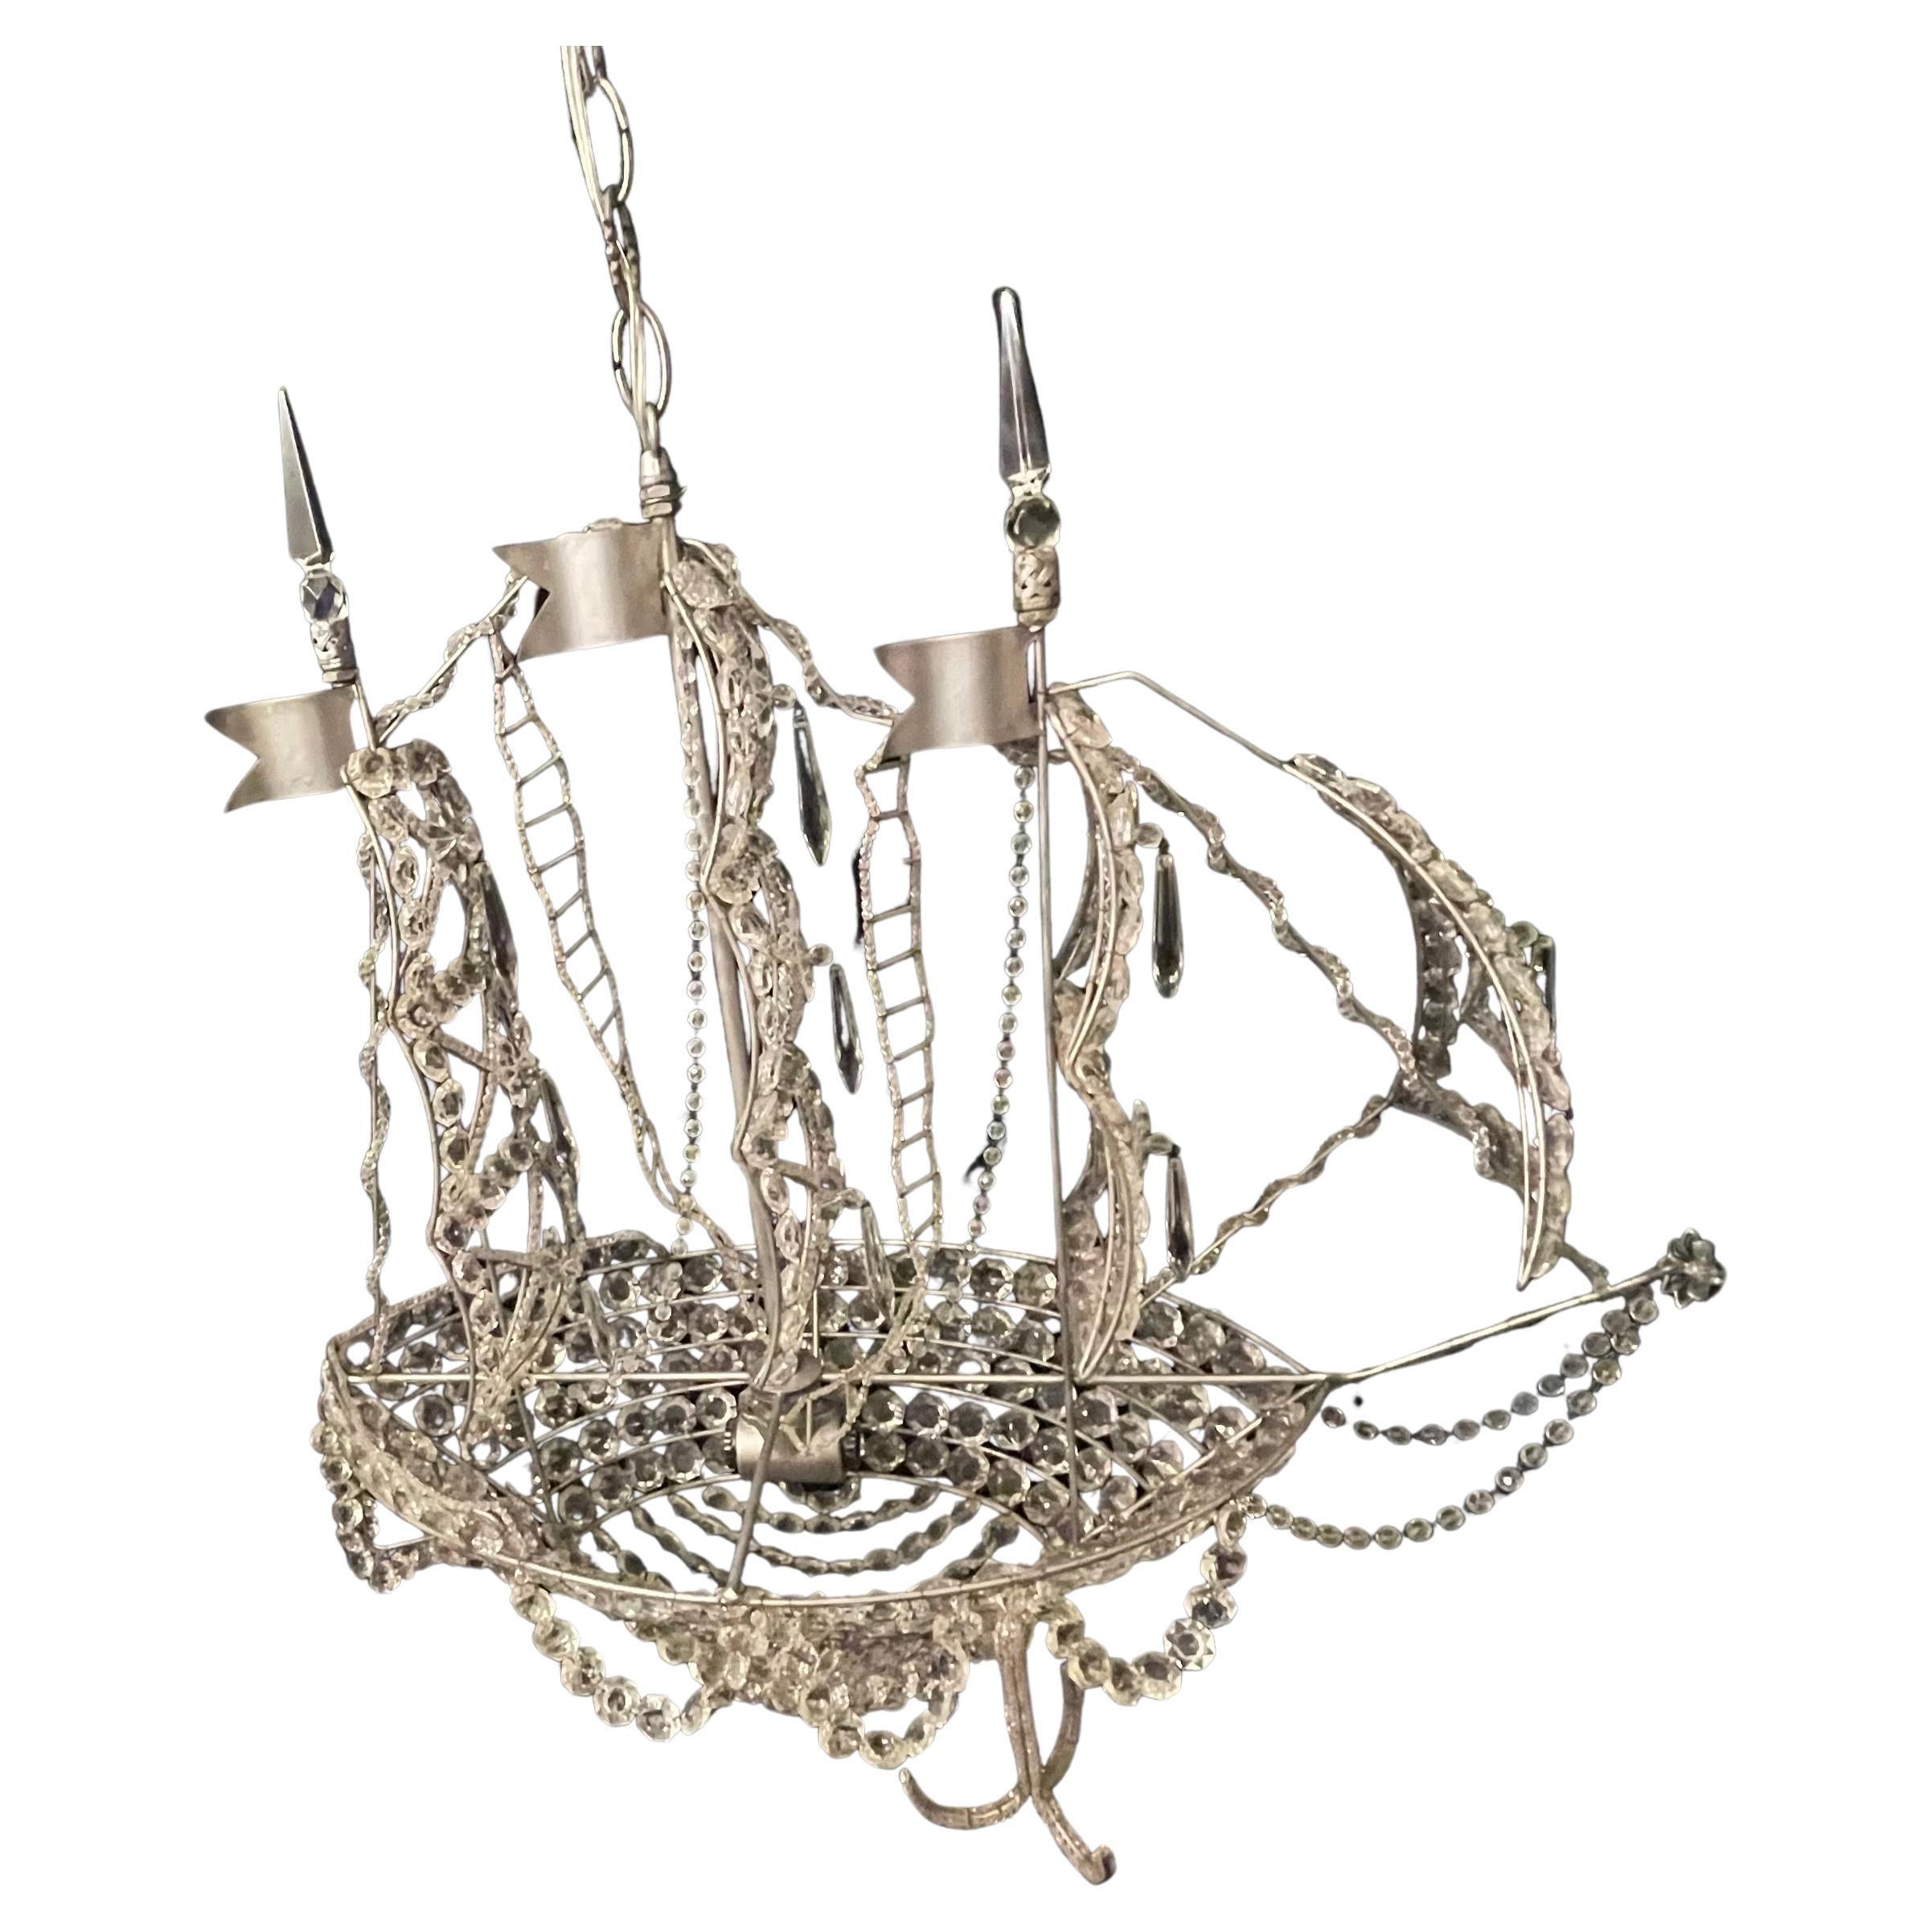 A wonderful silver gilt boat / ship chandelier that is beautifully detailed with a crystal crystal hull and beaded sails crystal star accents throughout. Outfitted with 2 candelabra internal lights, In the manner of Baguès.
This would be a beautiful